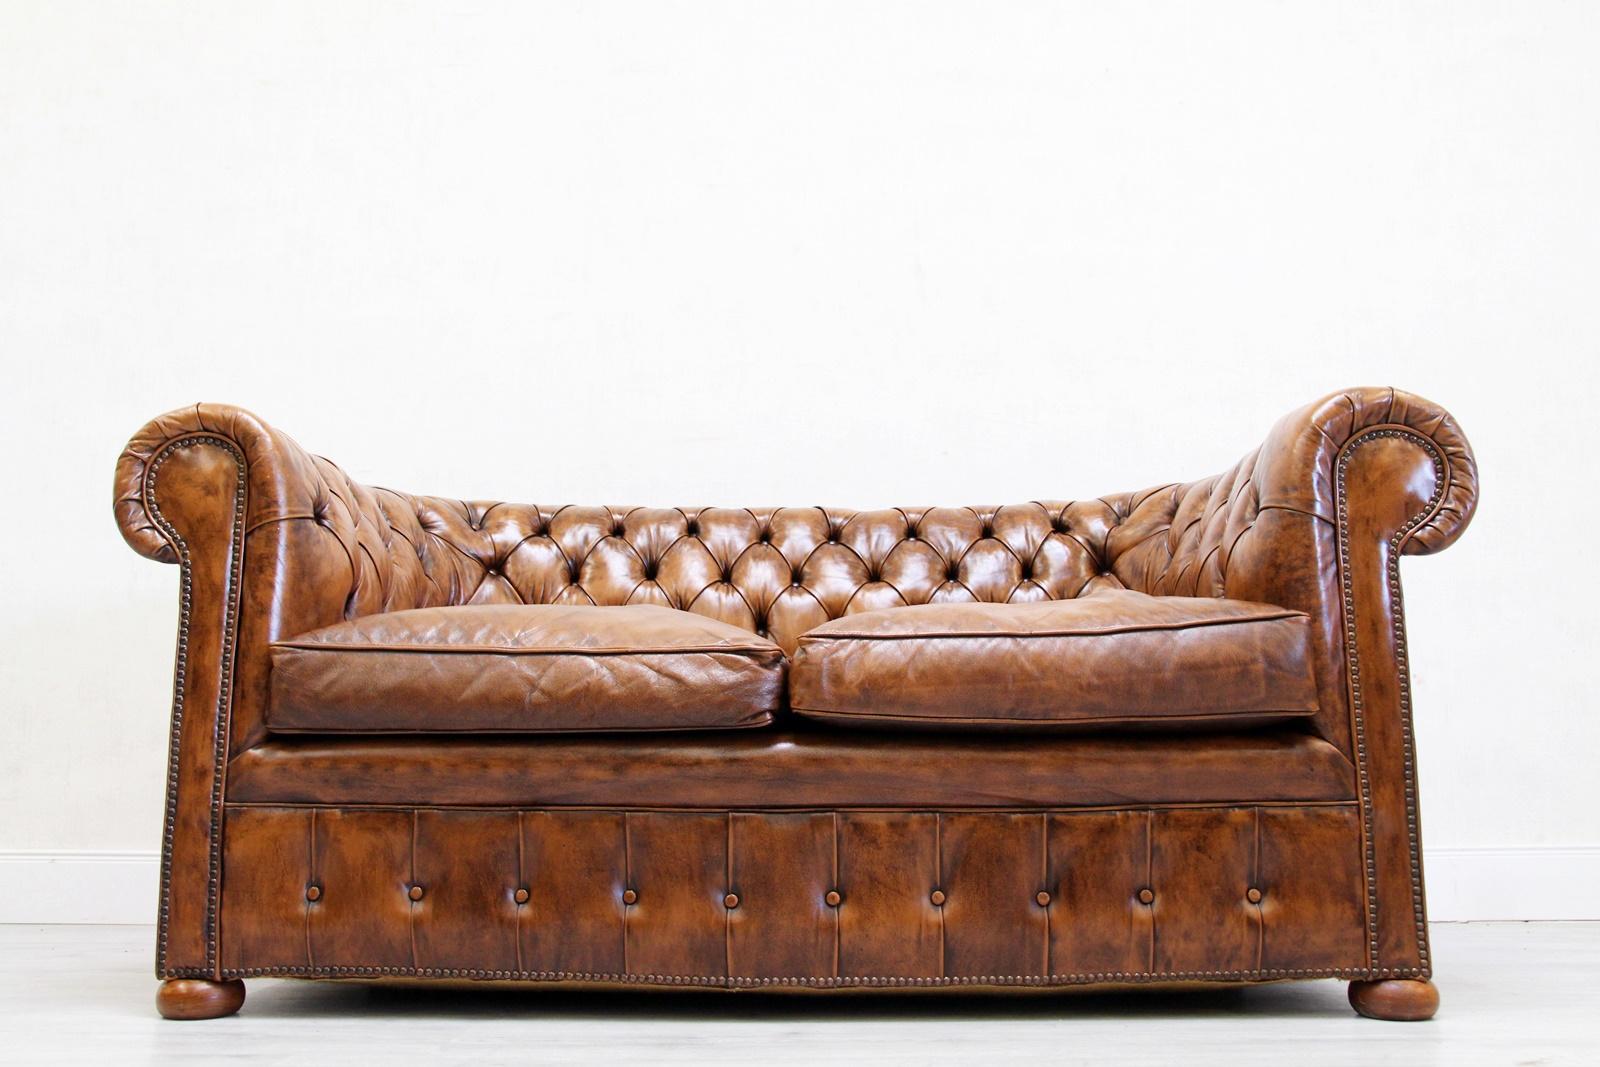 Chesterfield real leather two-seat sofa
in original design
Very comfortable and with beautiful patina
Condition: The sofa is in a very good condition
sofa
Measures: Height x 73cm length x 150cm depth x 85cm
Sitzpläche: quilted
Cushion is in